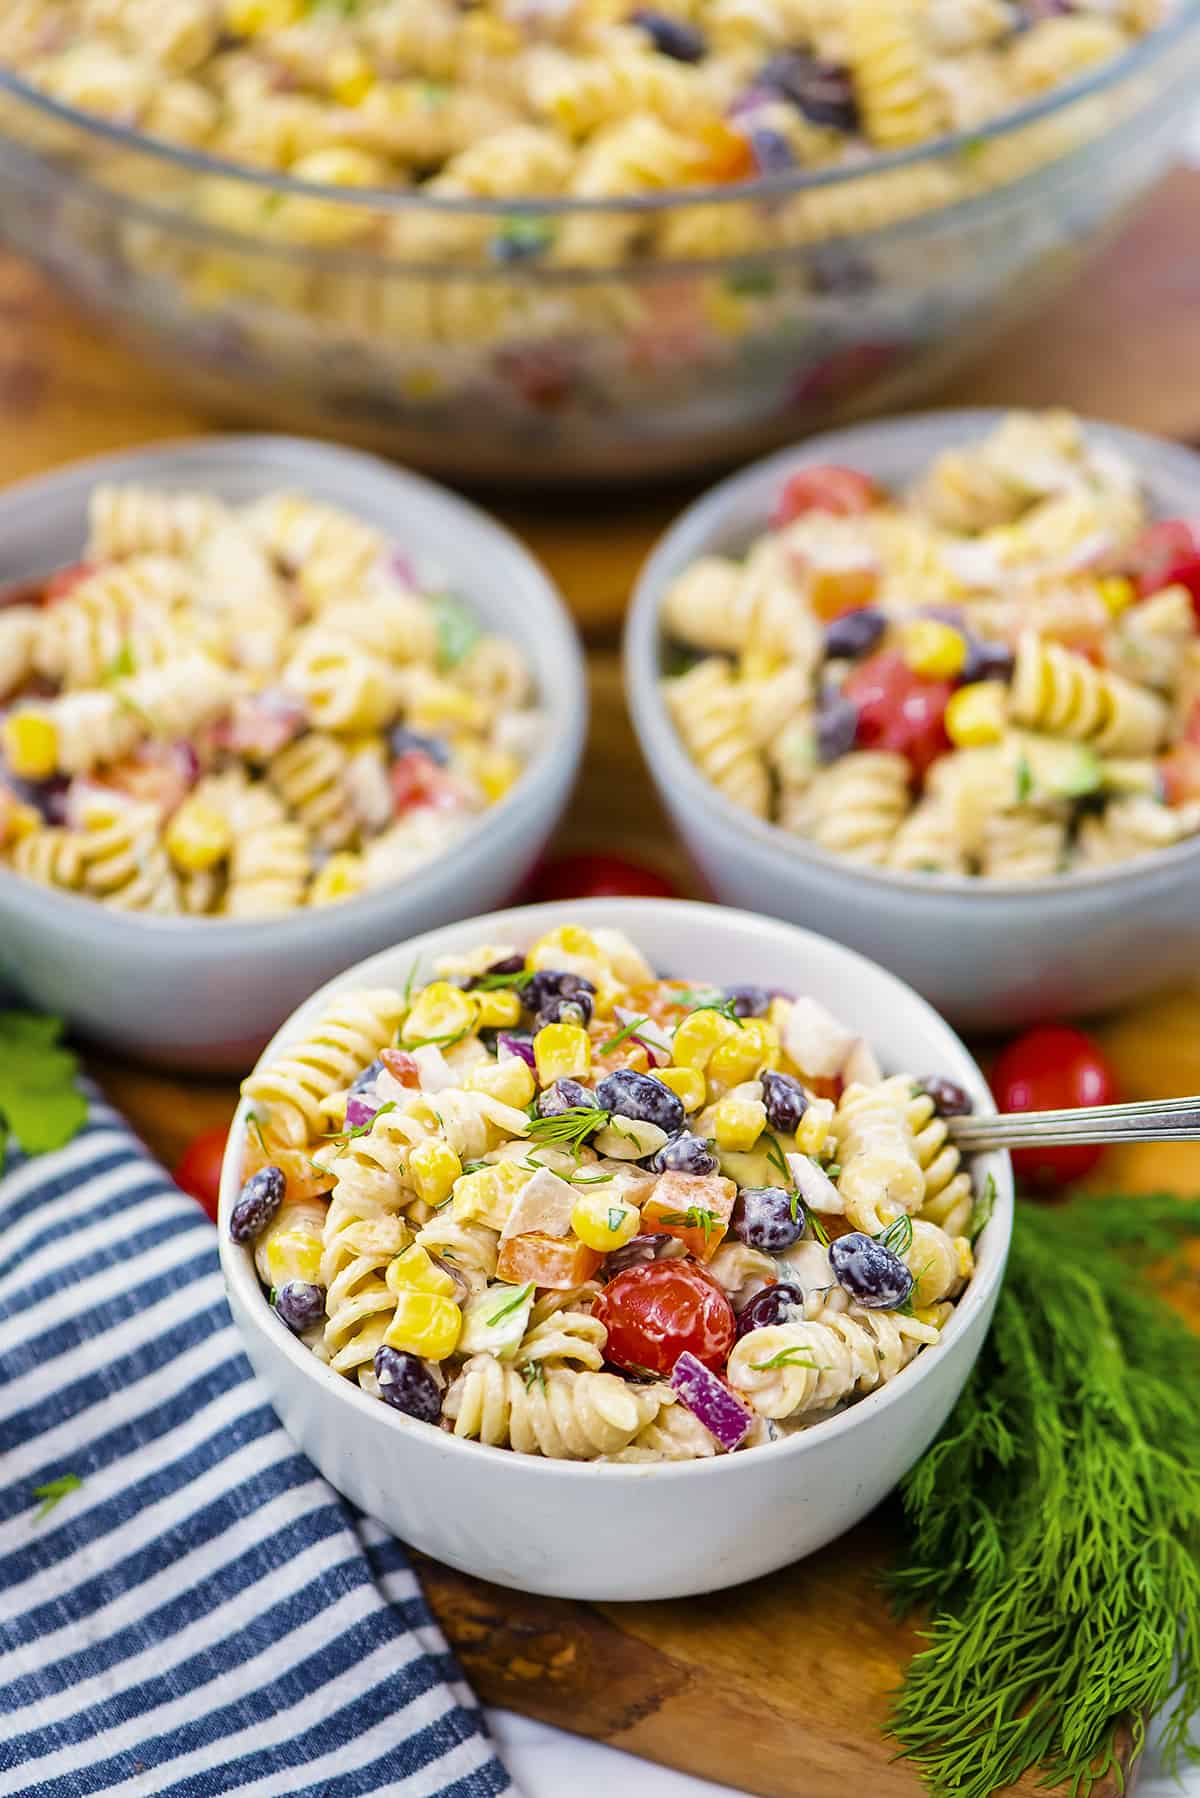 Southwest pasta salad in small bowls.